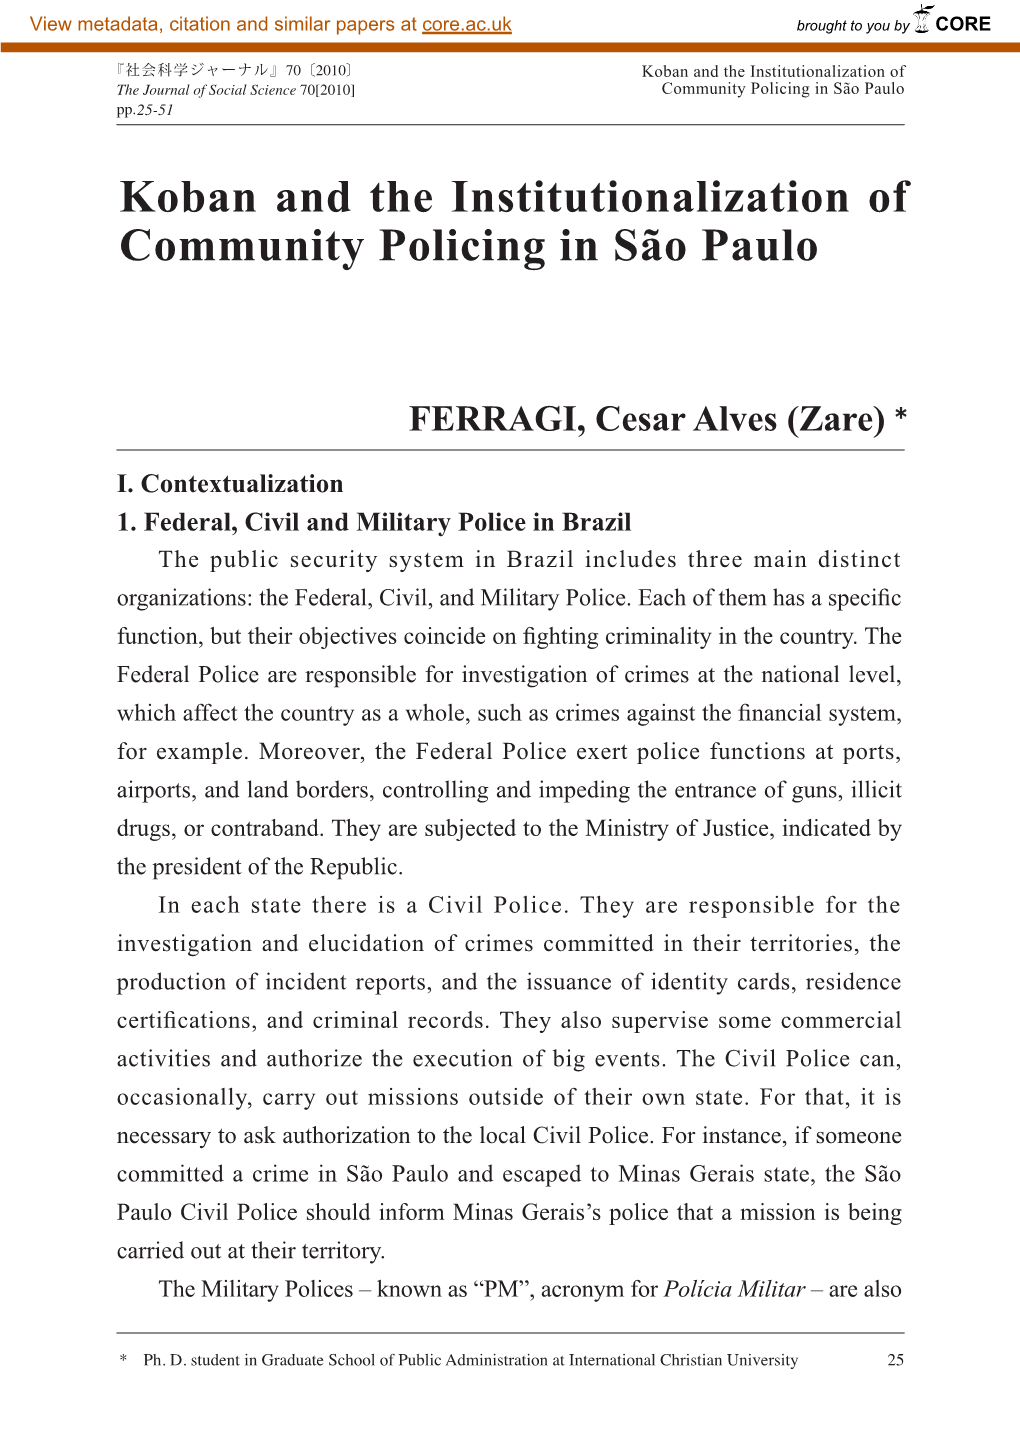 Koban and the Institutionalization of Community Policing in São Paulo 25-51